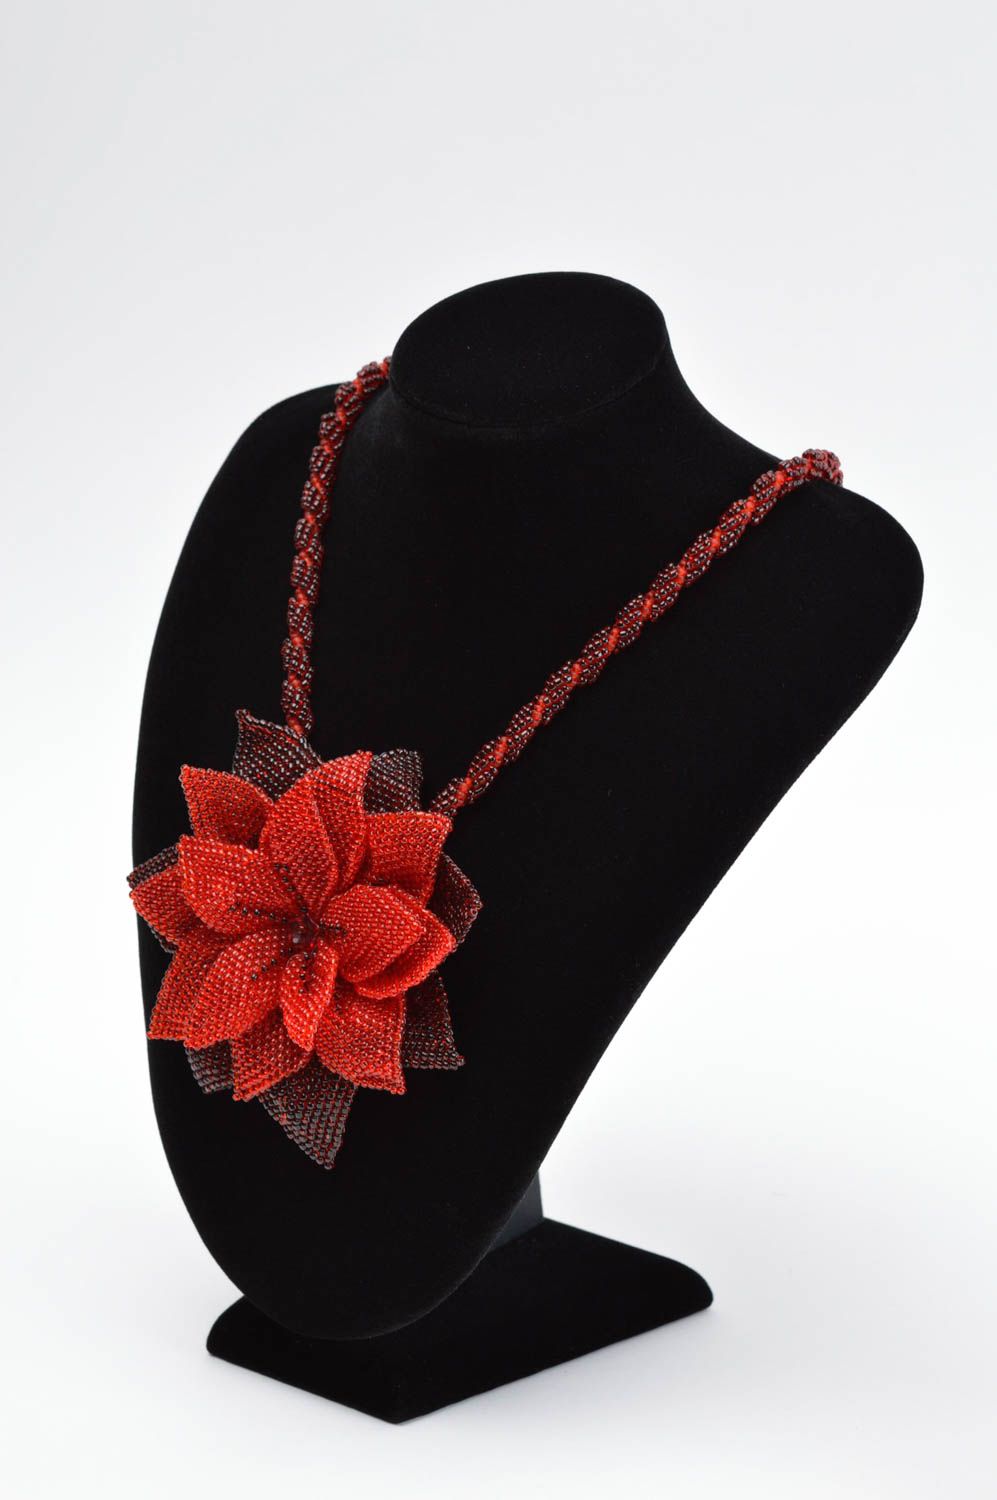 Handmade red flower necklace stylish beaded necklace unusual accessory photo 1